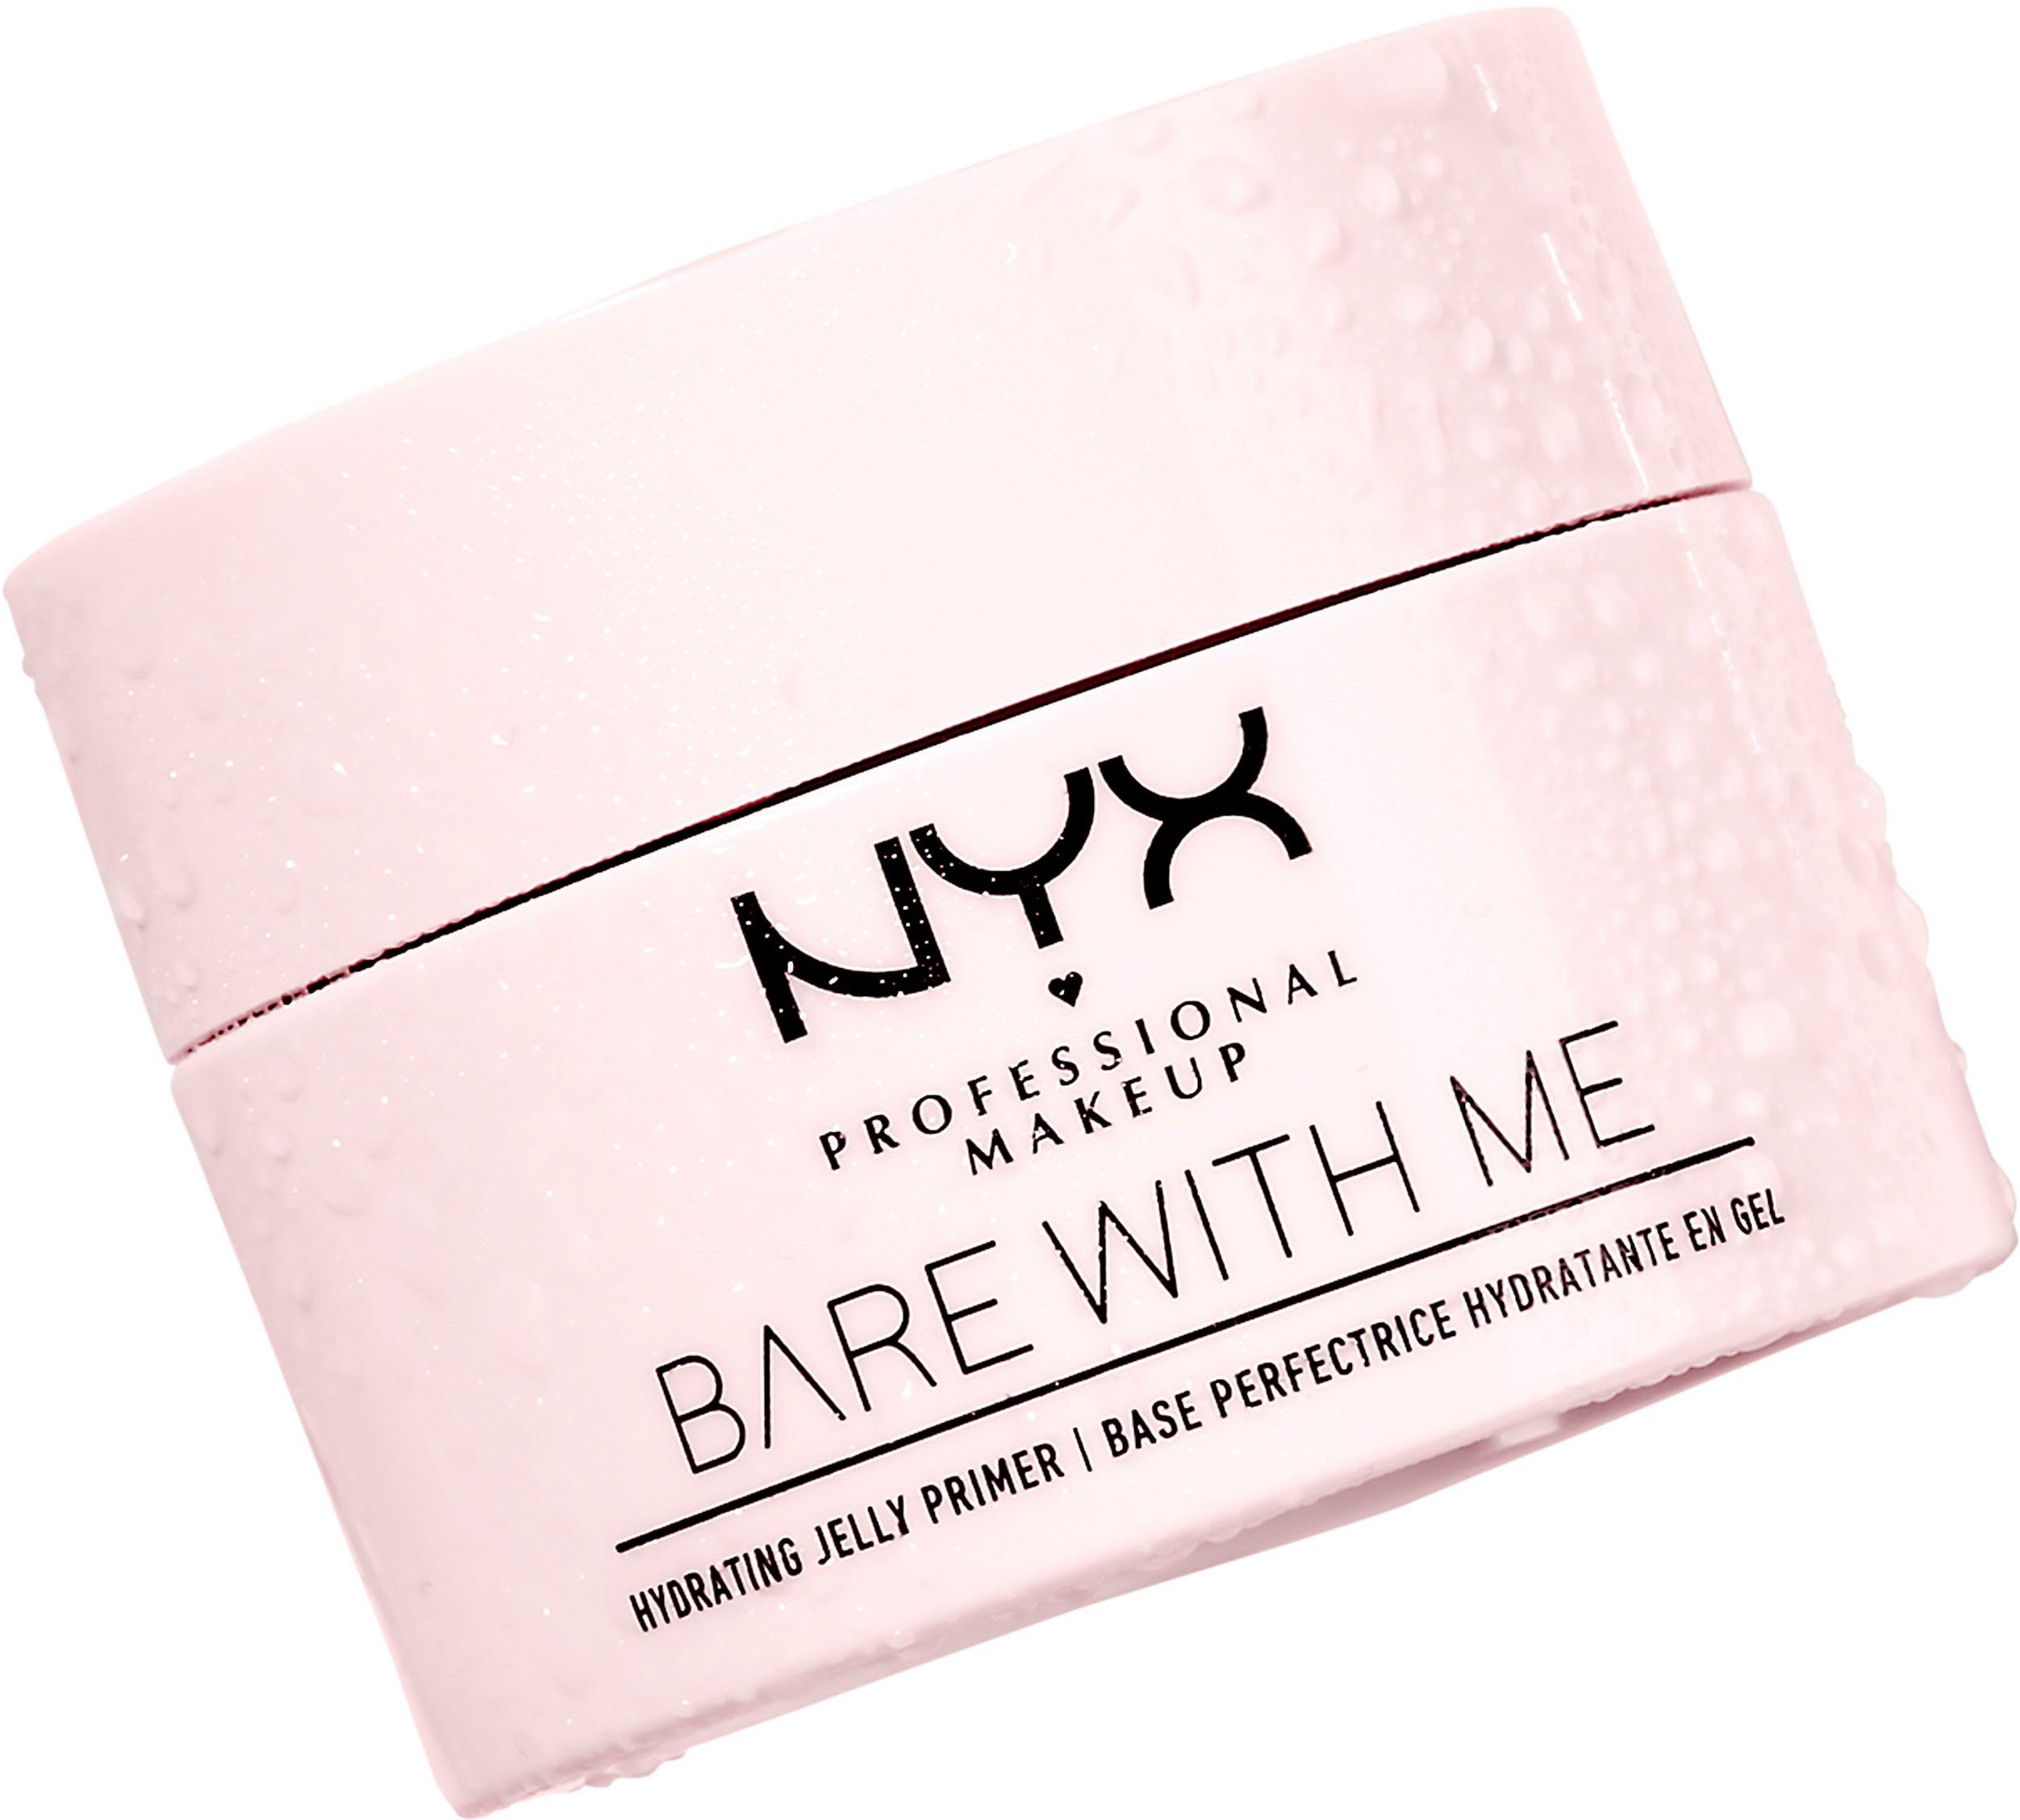 NYX Primer NYX Professional Makeup Bare With Me Hydrating Jelly Primer | Primer